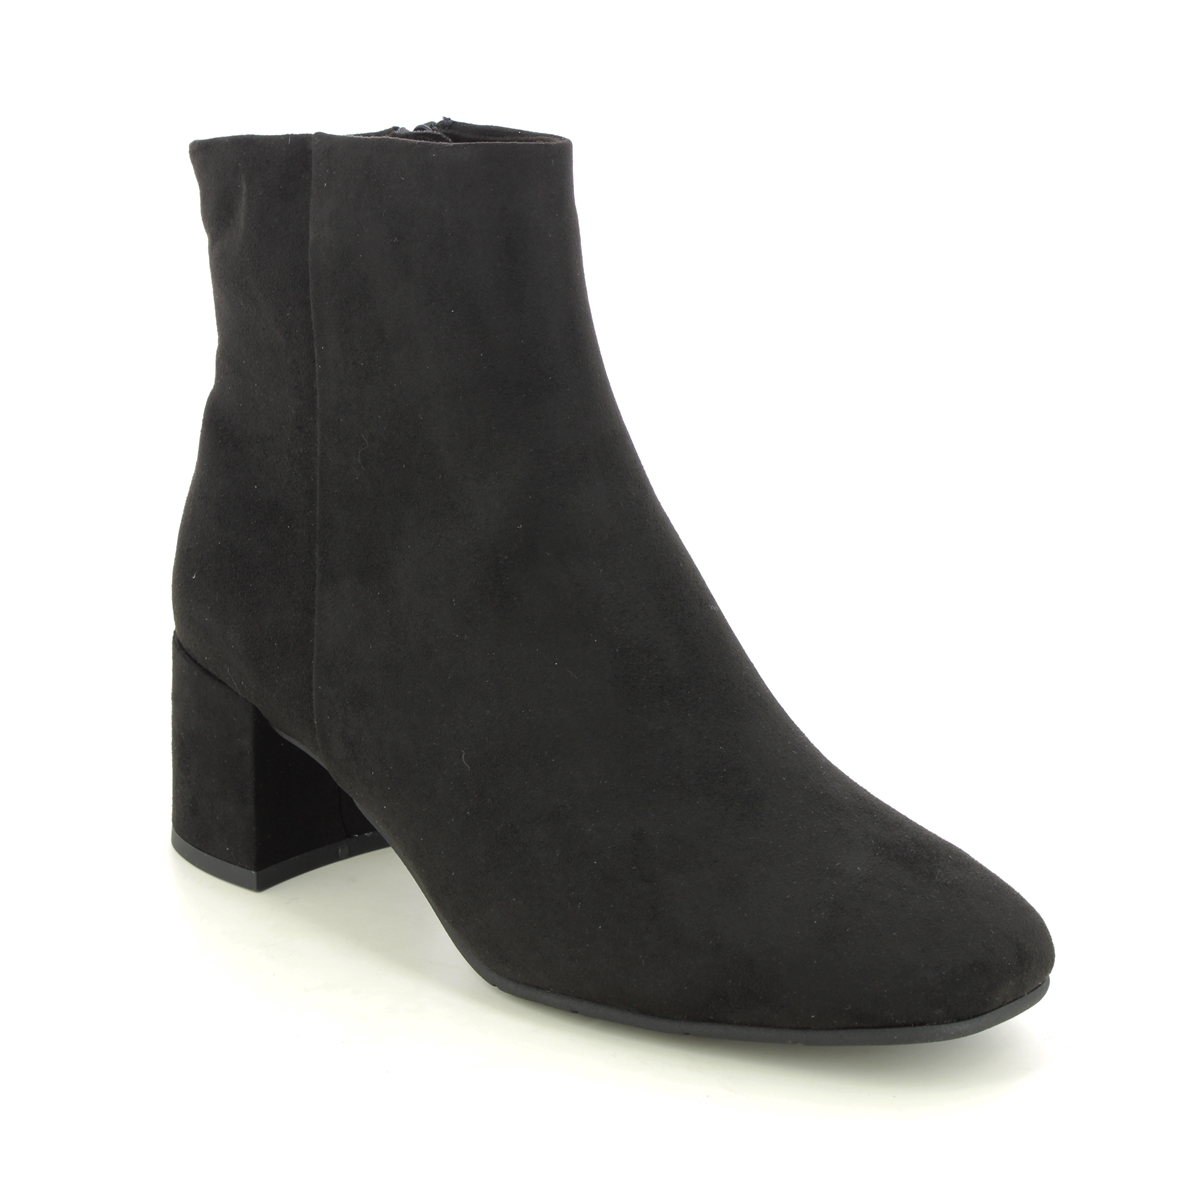 Marco Tozzi Vacco Black Womens Heeled Boots 25349-41-001 In Size 39 In Plain Black